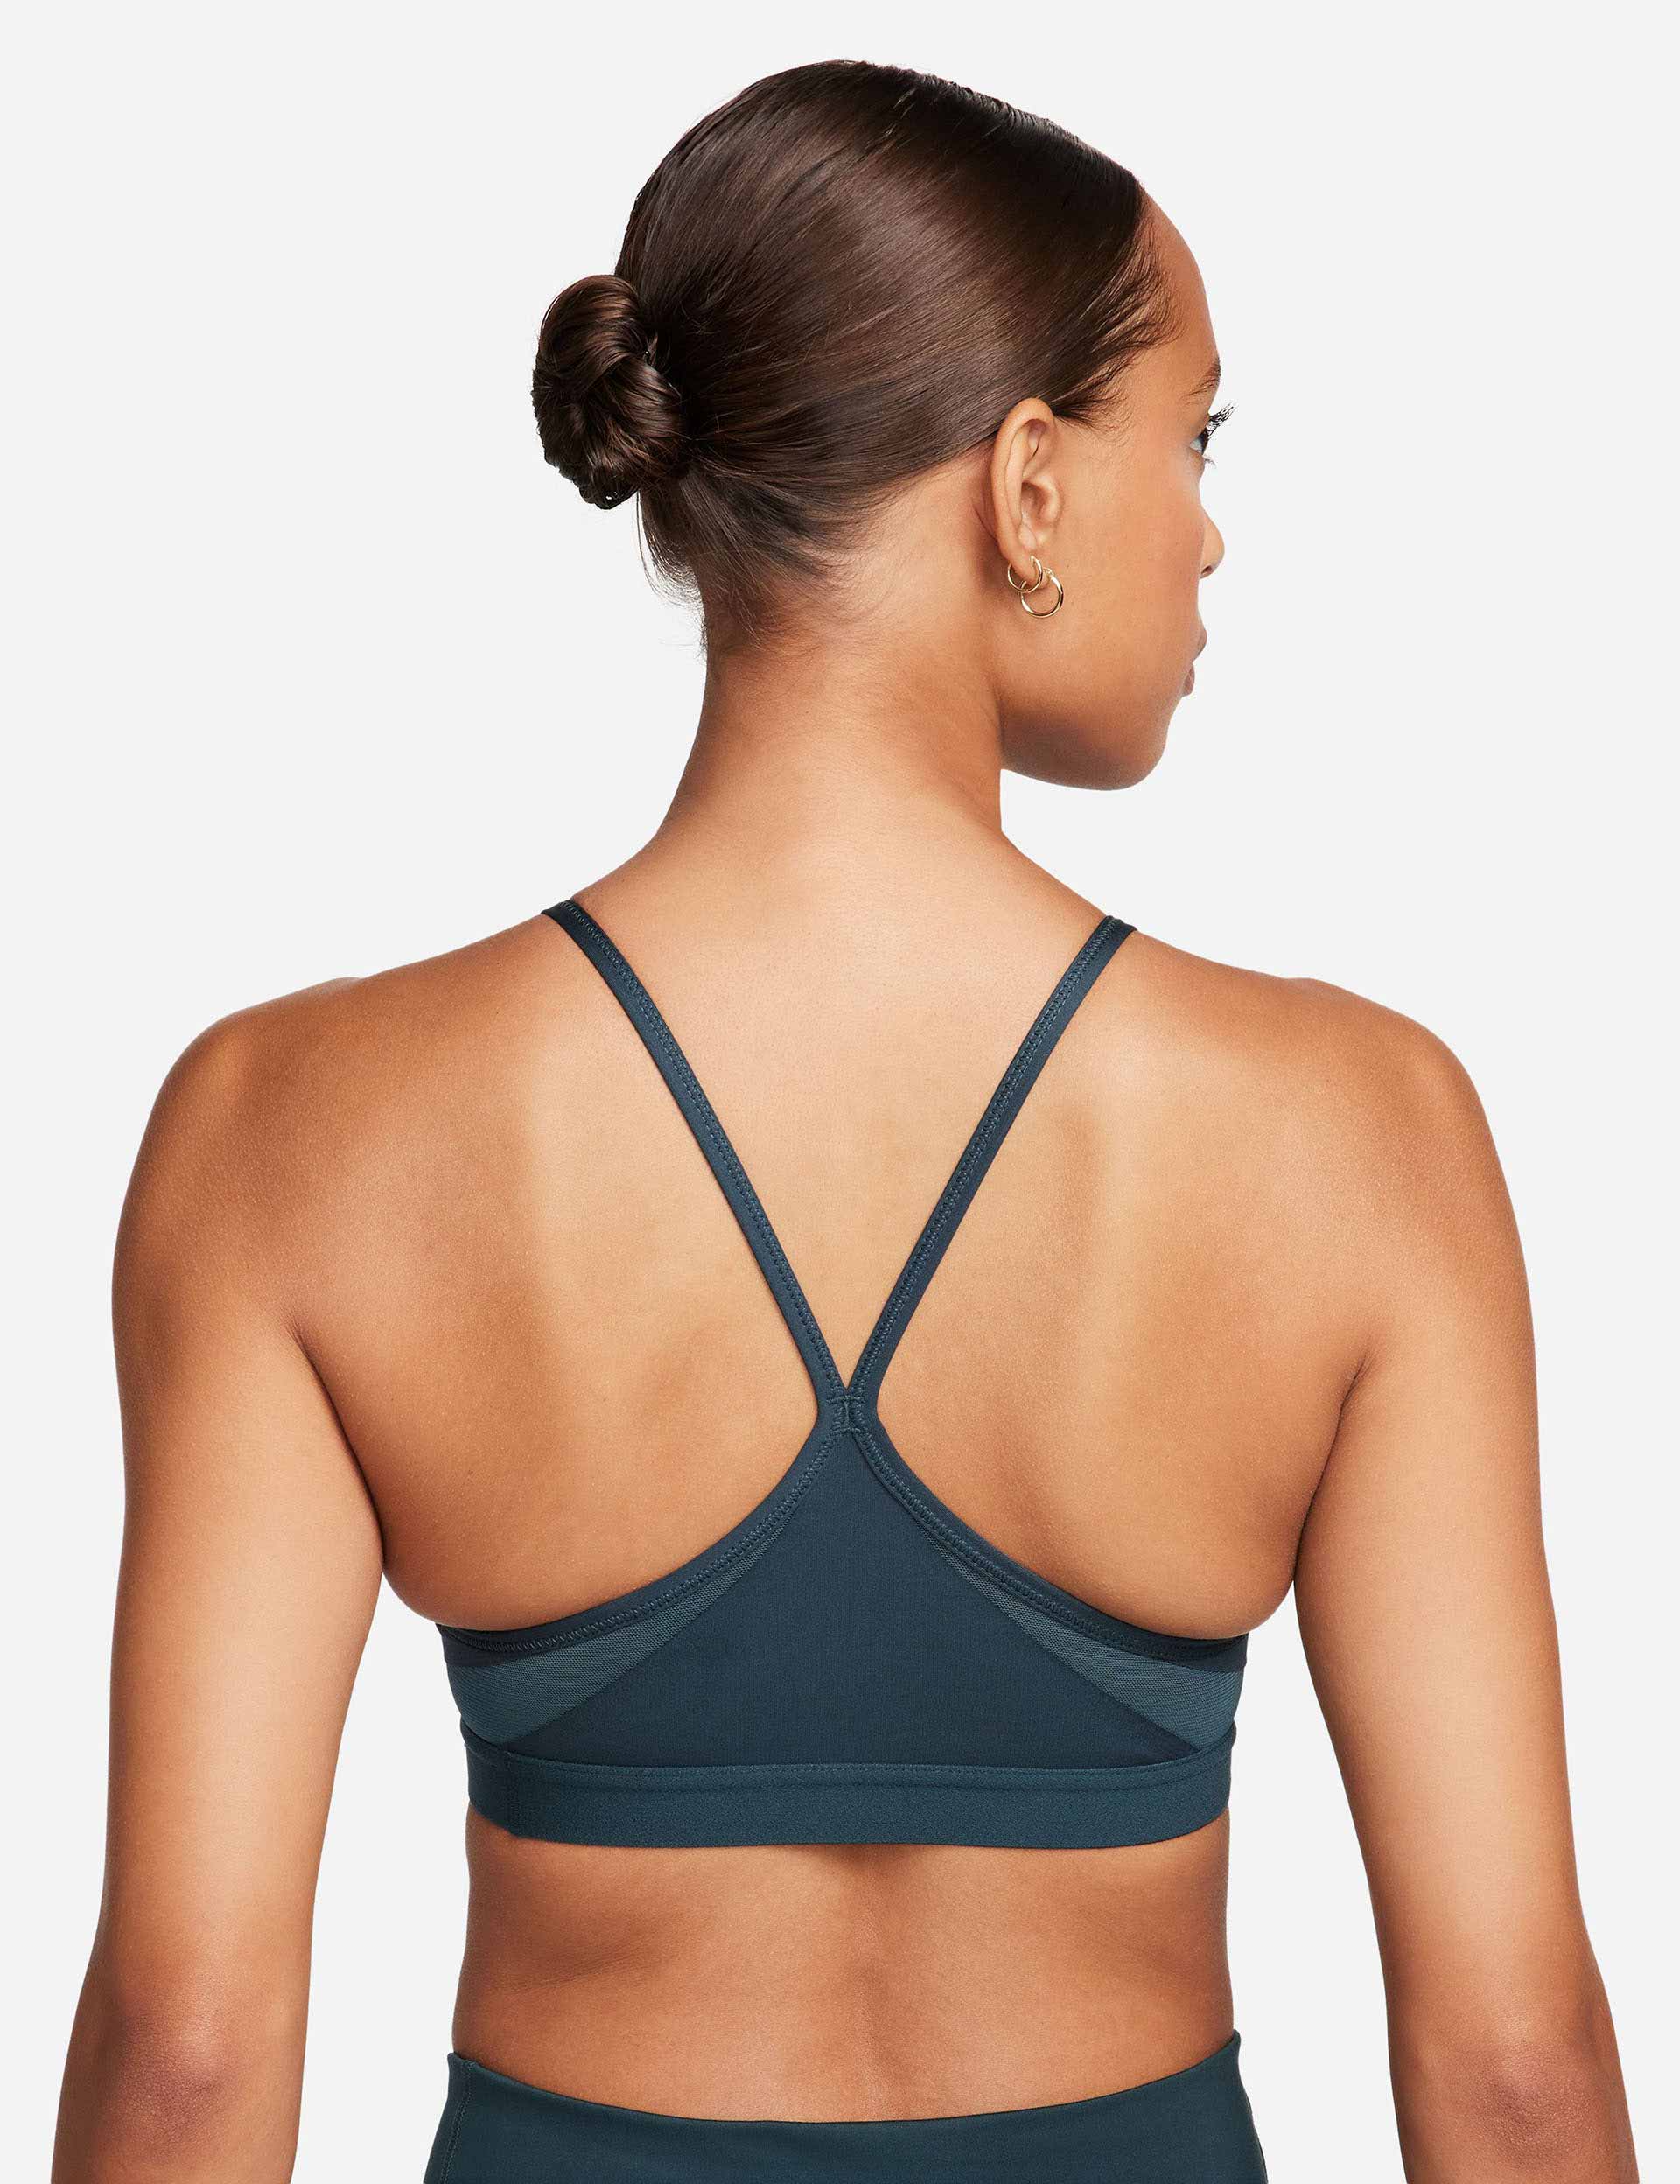 Nike Women's Dri-FIT Indy Light-Support V-Neck Sports Bra Diffused